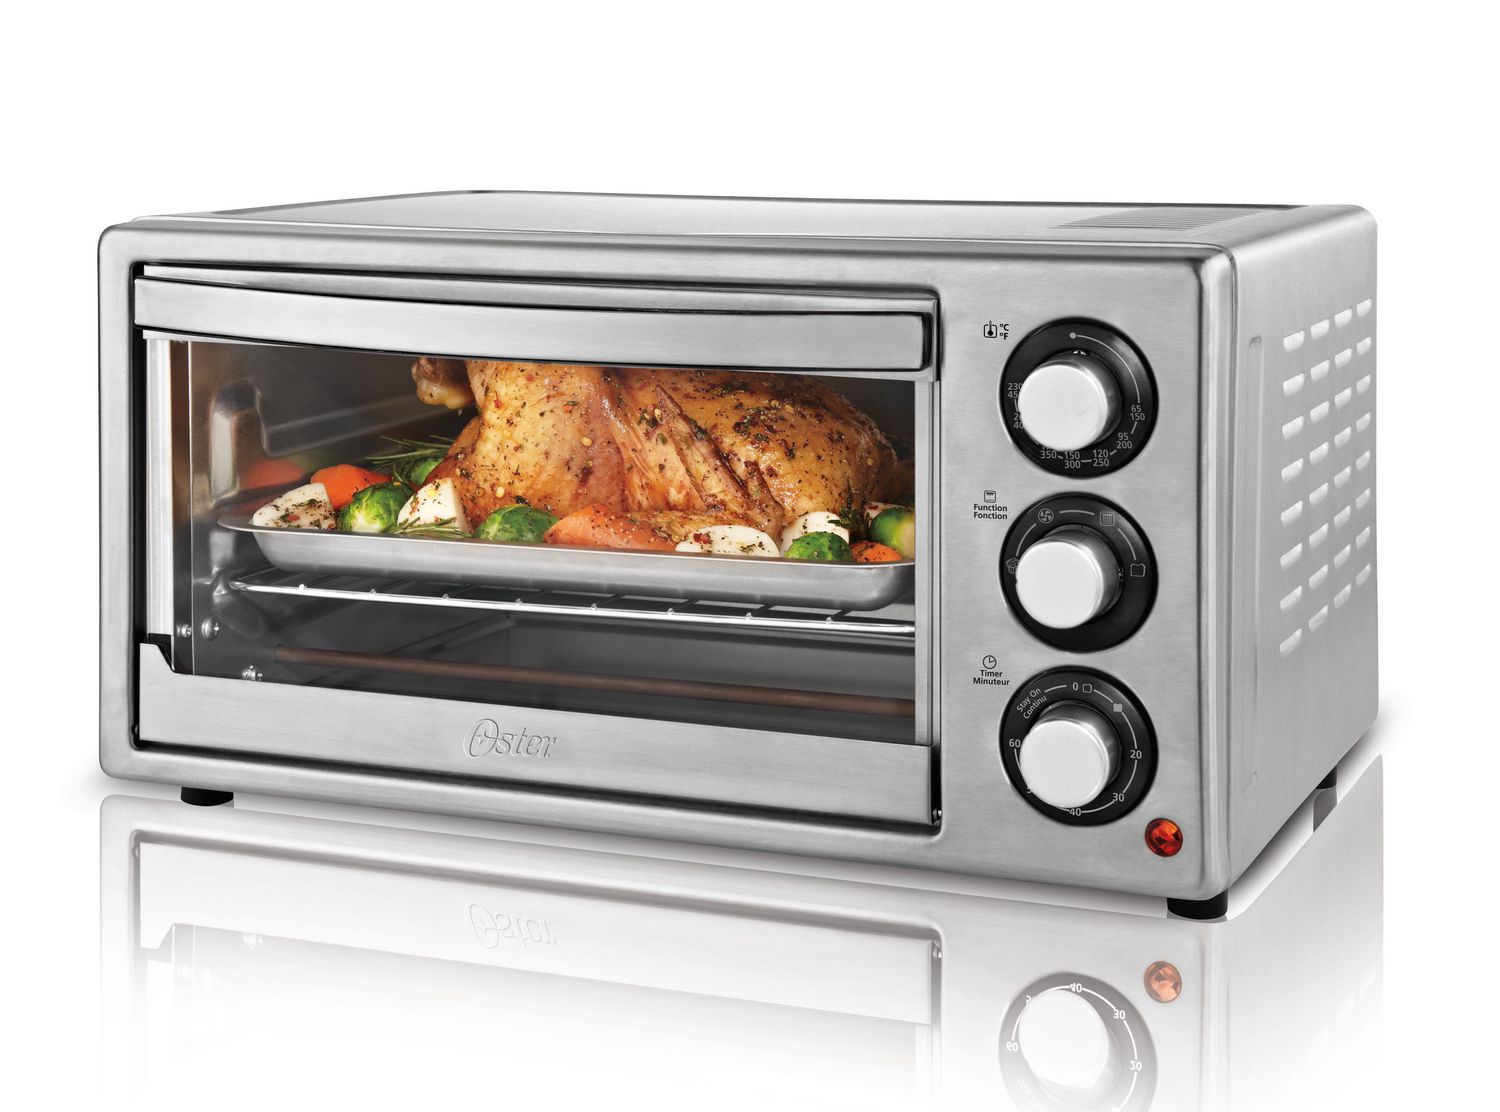 Oster 6 Slice Convection Toaster Oven | Walmart Canada